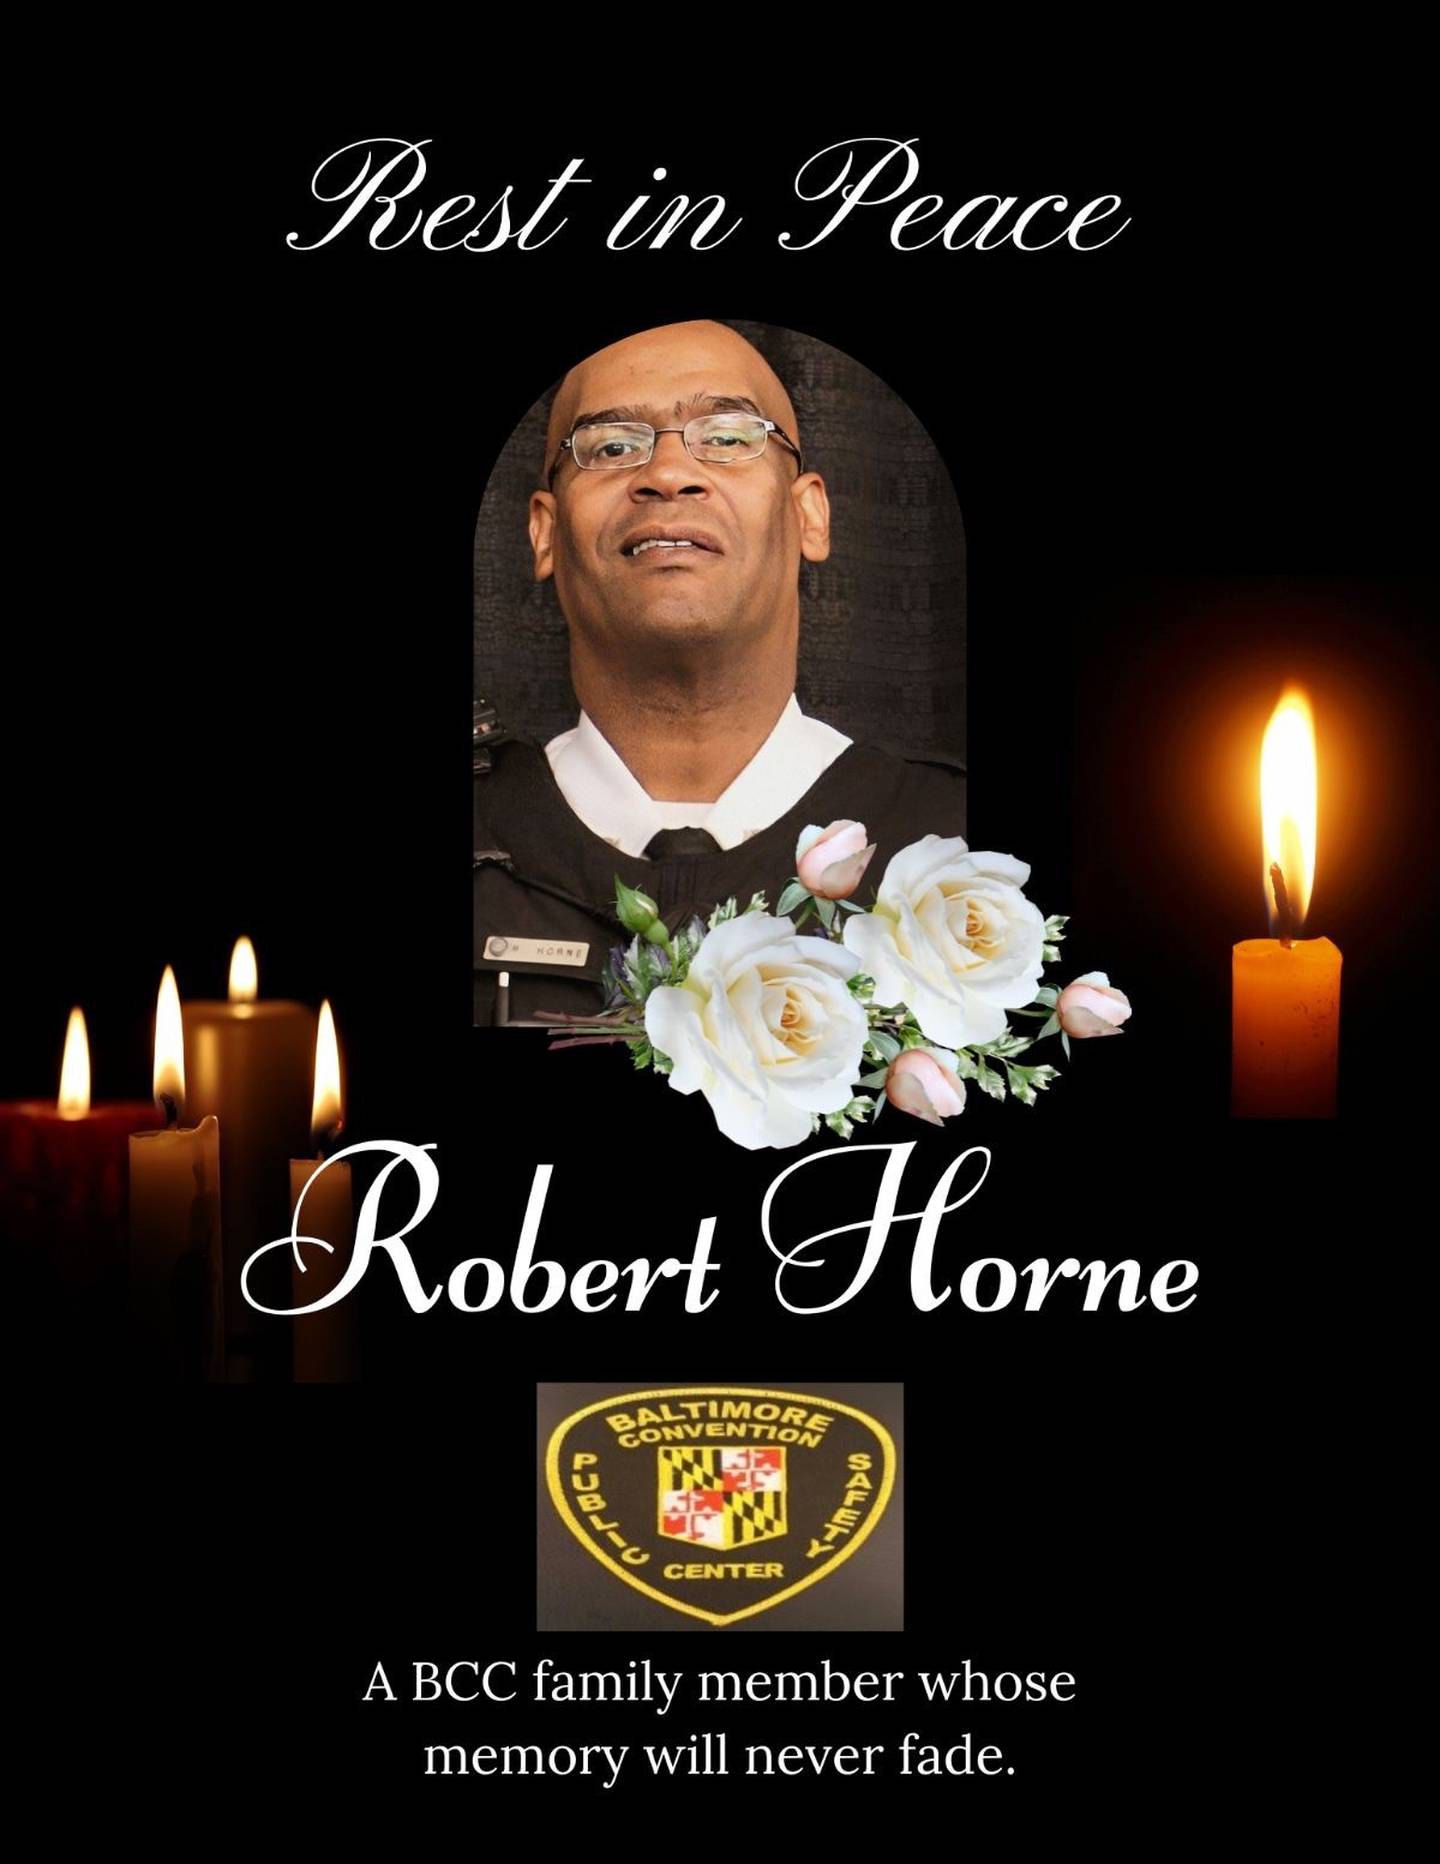 A photo of Robert Horne is surrounded by flowers and images of candles.